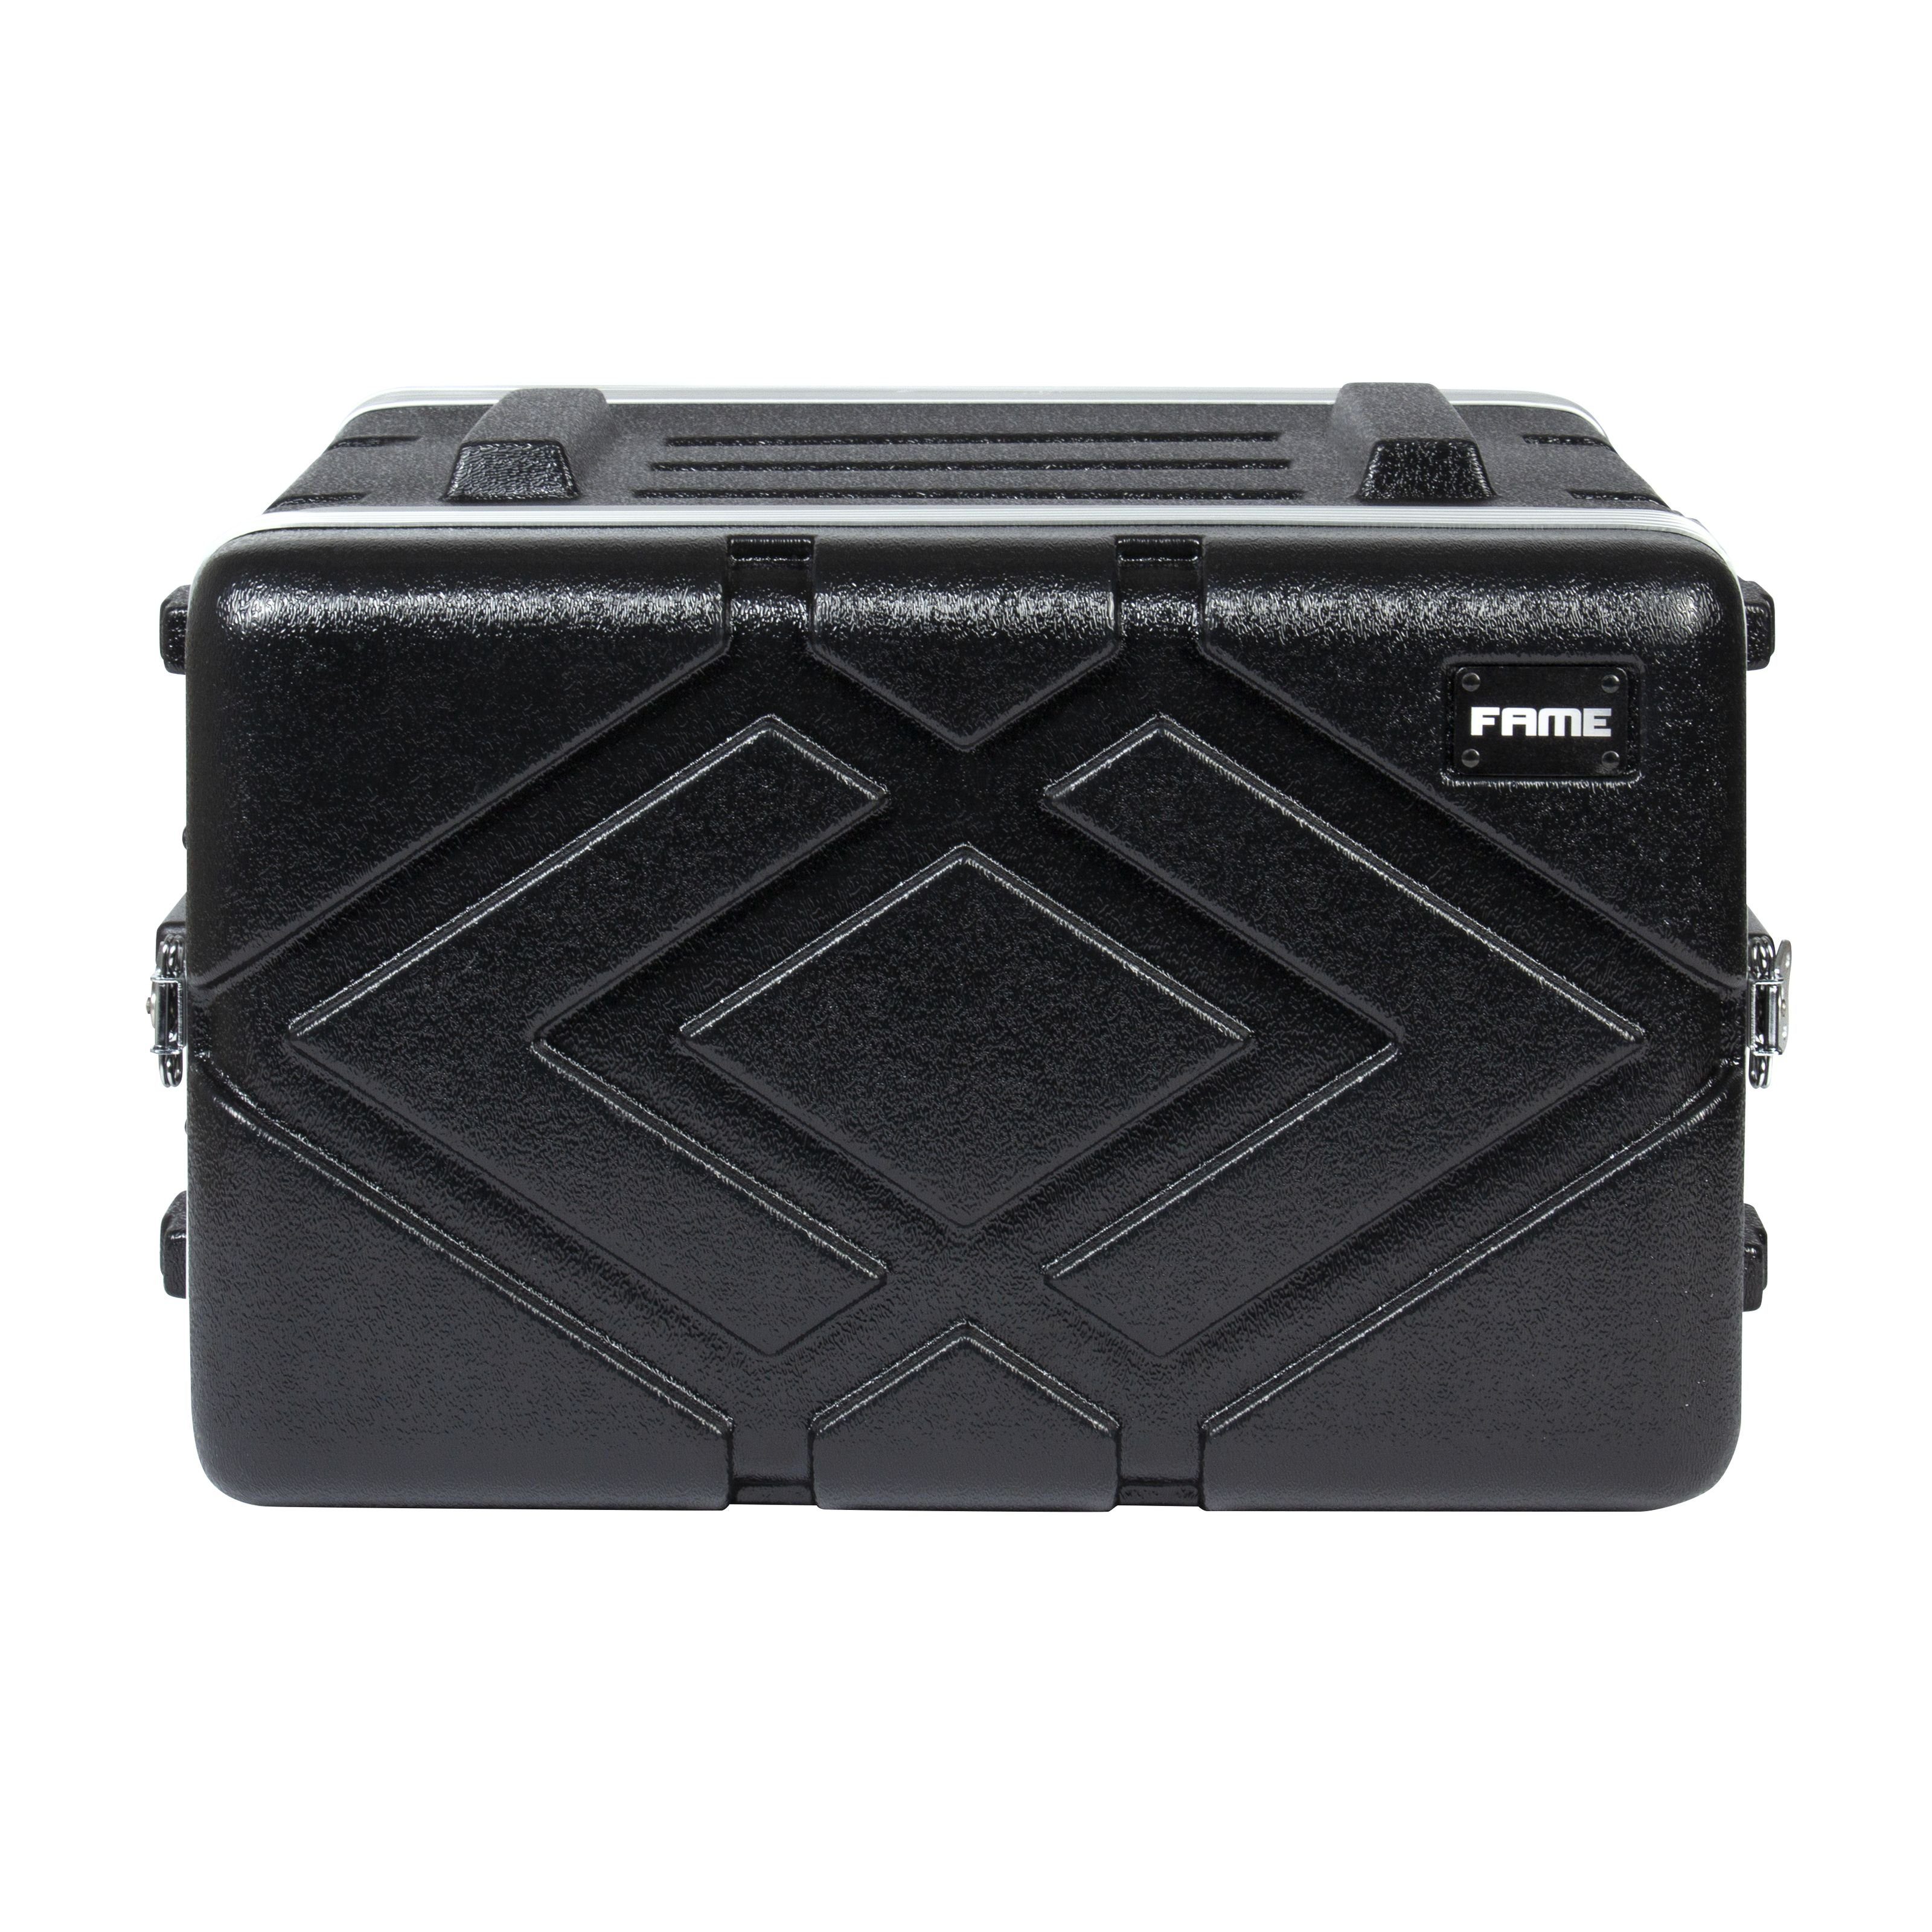 PVC-Case, MKII Tiefe 430mm 6HE Audio Fame weRack Koffer, deep